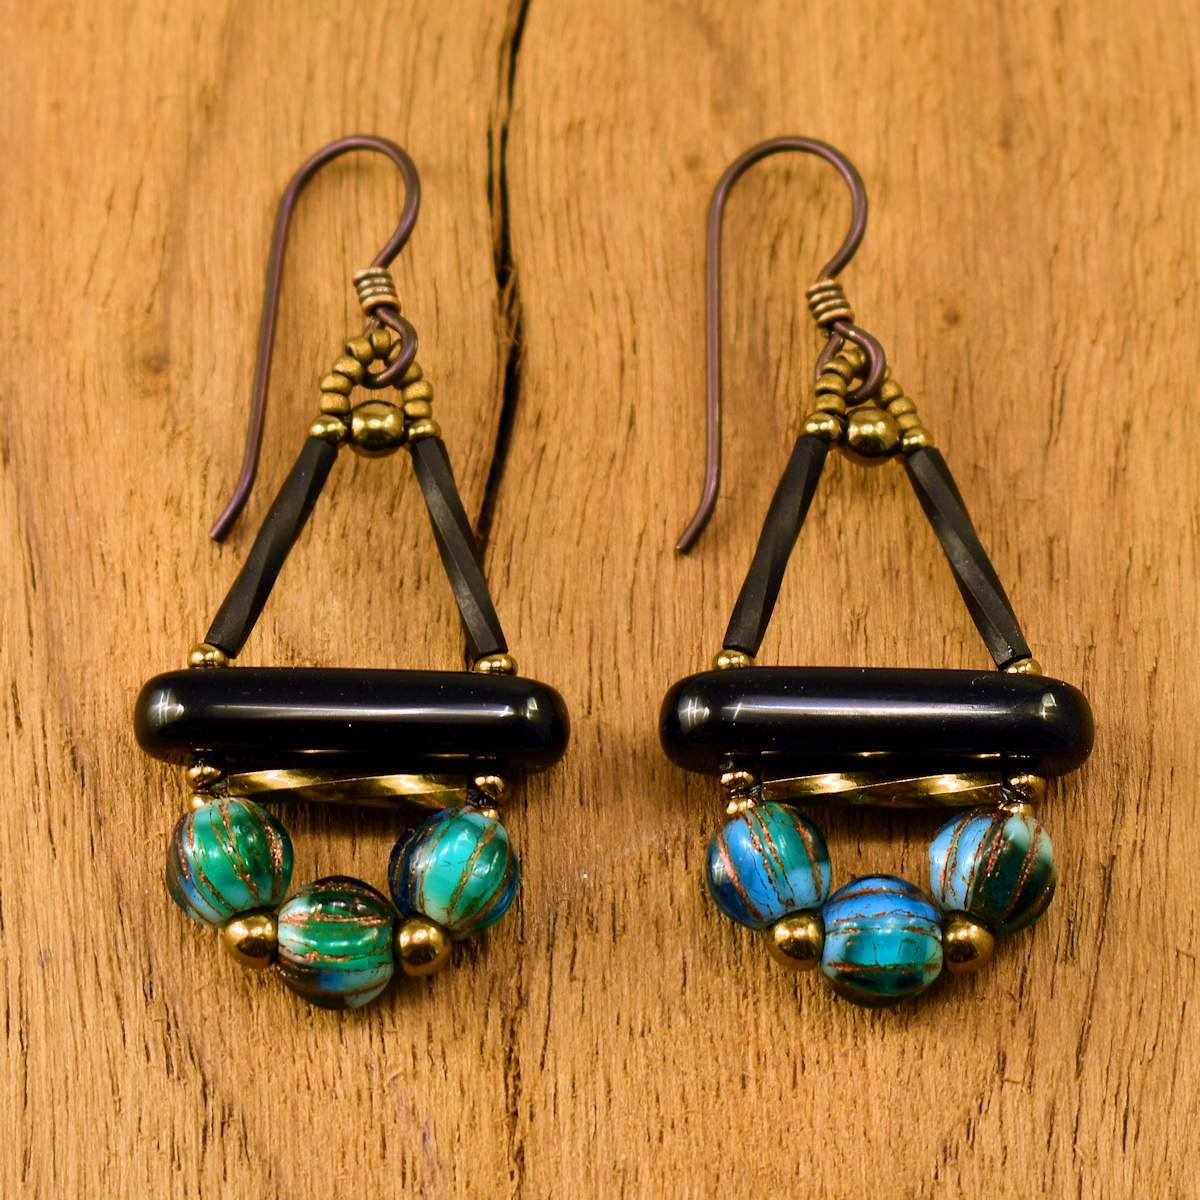 Black earrings with blue and green variegated beads and dark ear wires on a wood background. These earrings are shaped like a triangle with a rocker bottom.  The top of the rectangle is formed by twisted matte black tube beads and the bottom is a glossy black bar. Below the bar is a horizontal gold tube, and at the bottom is an arc of ridged round beads that have internal swirls of green, white, blue, and turquoise.